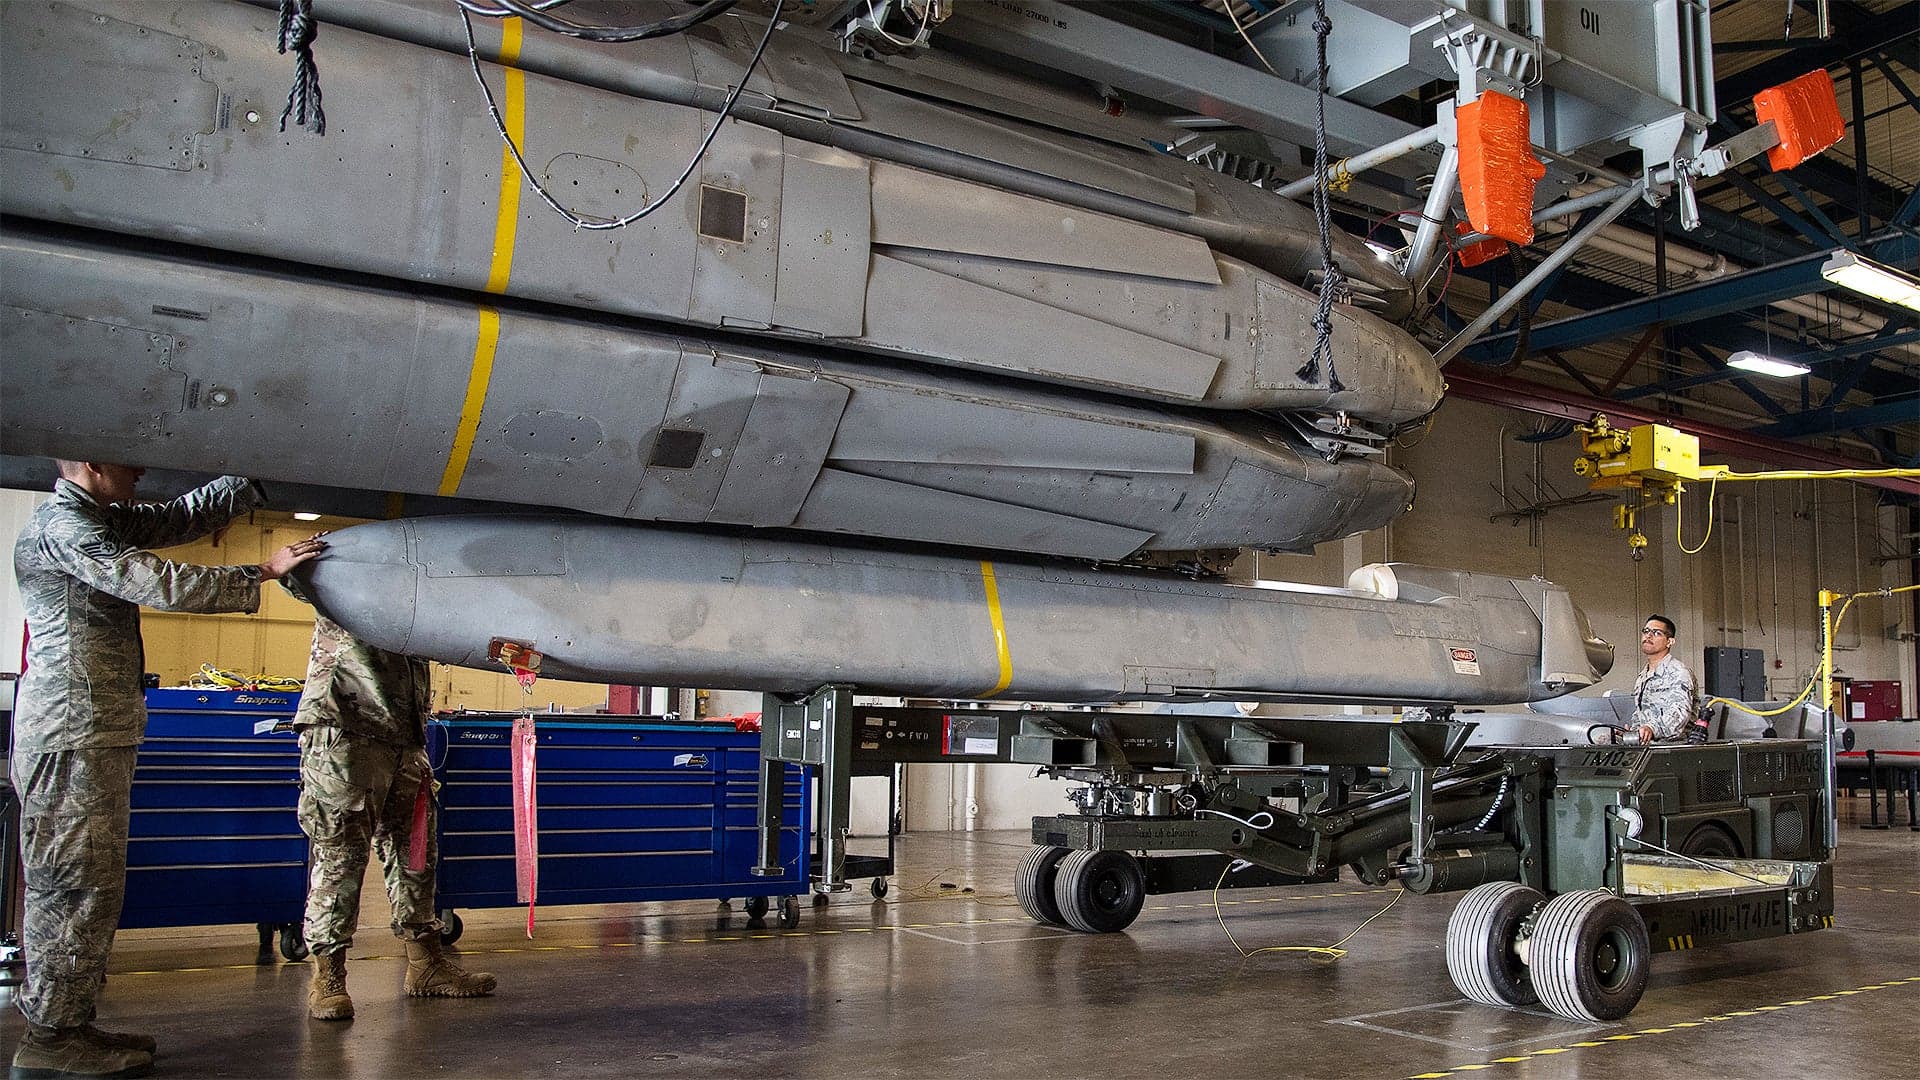 The AGM-86C Cruise Missile That Introduced GPS Guided Weaponry Is Bowing Out Of Service